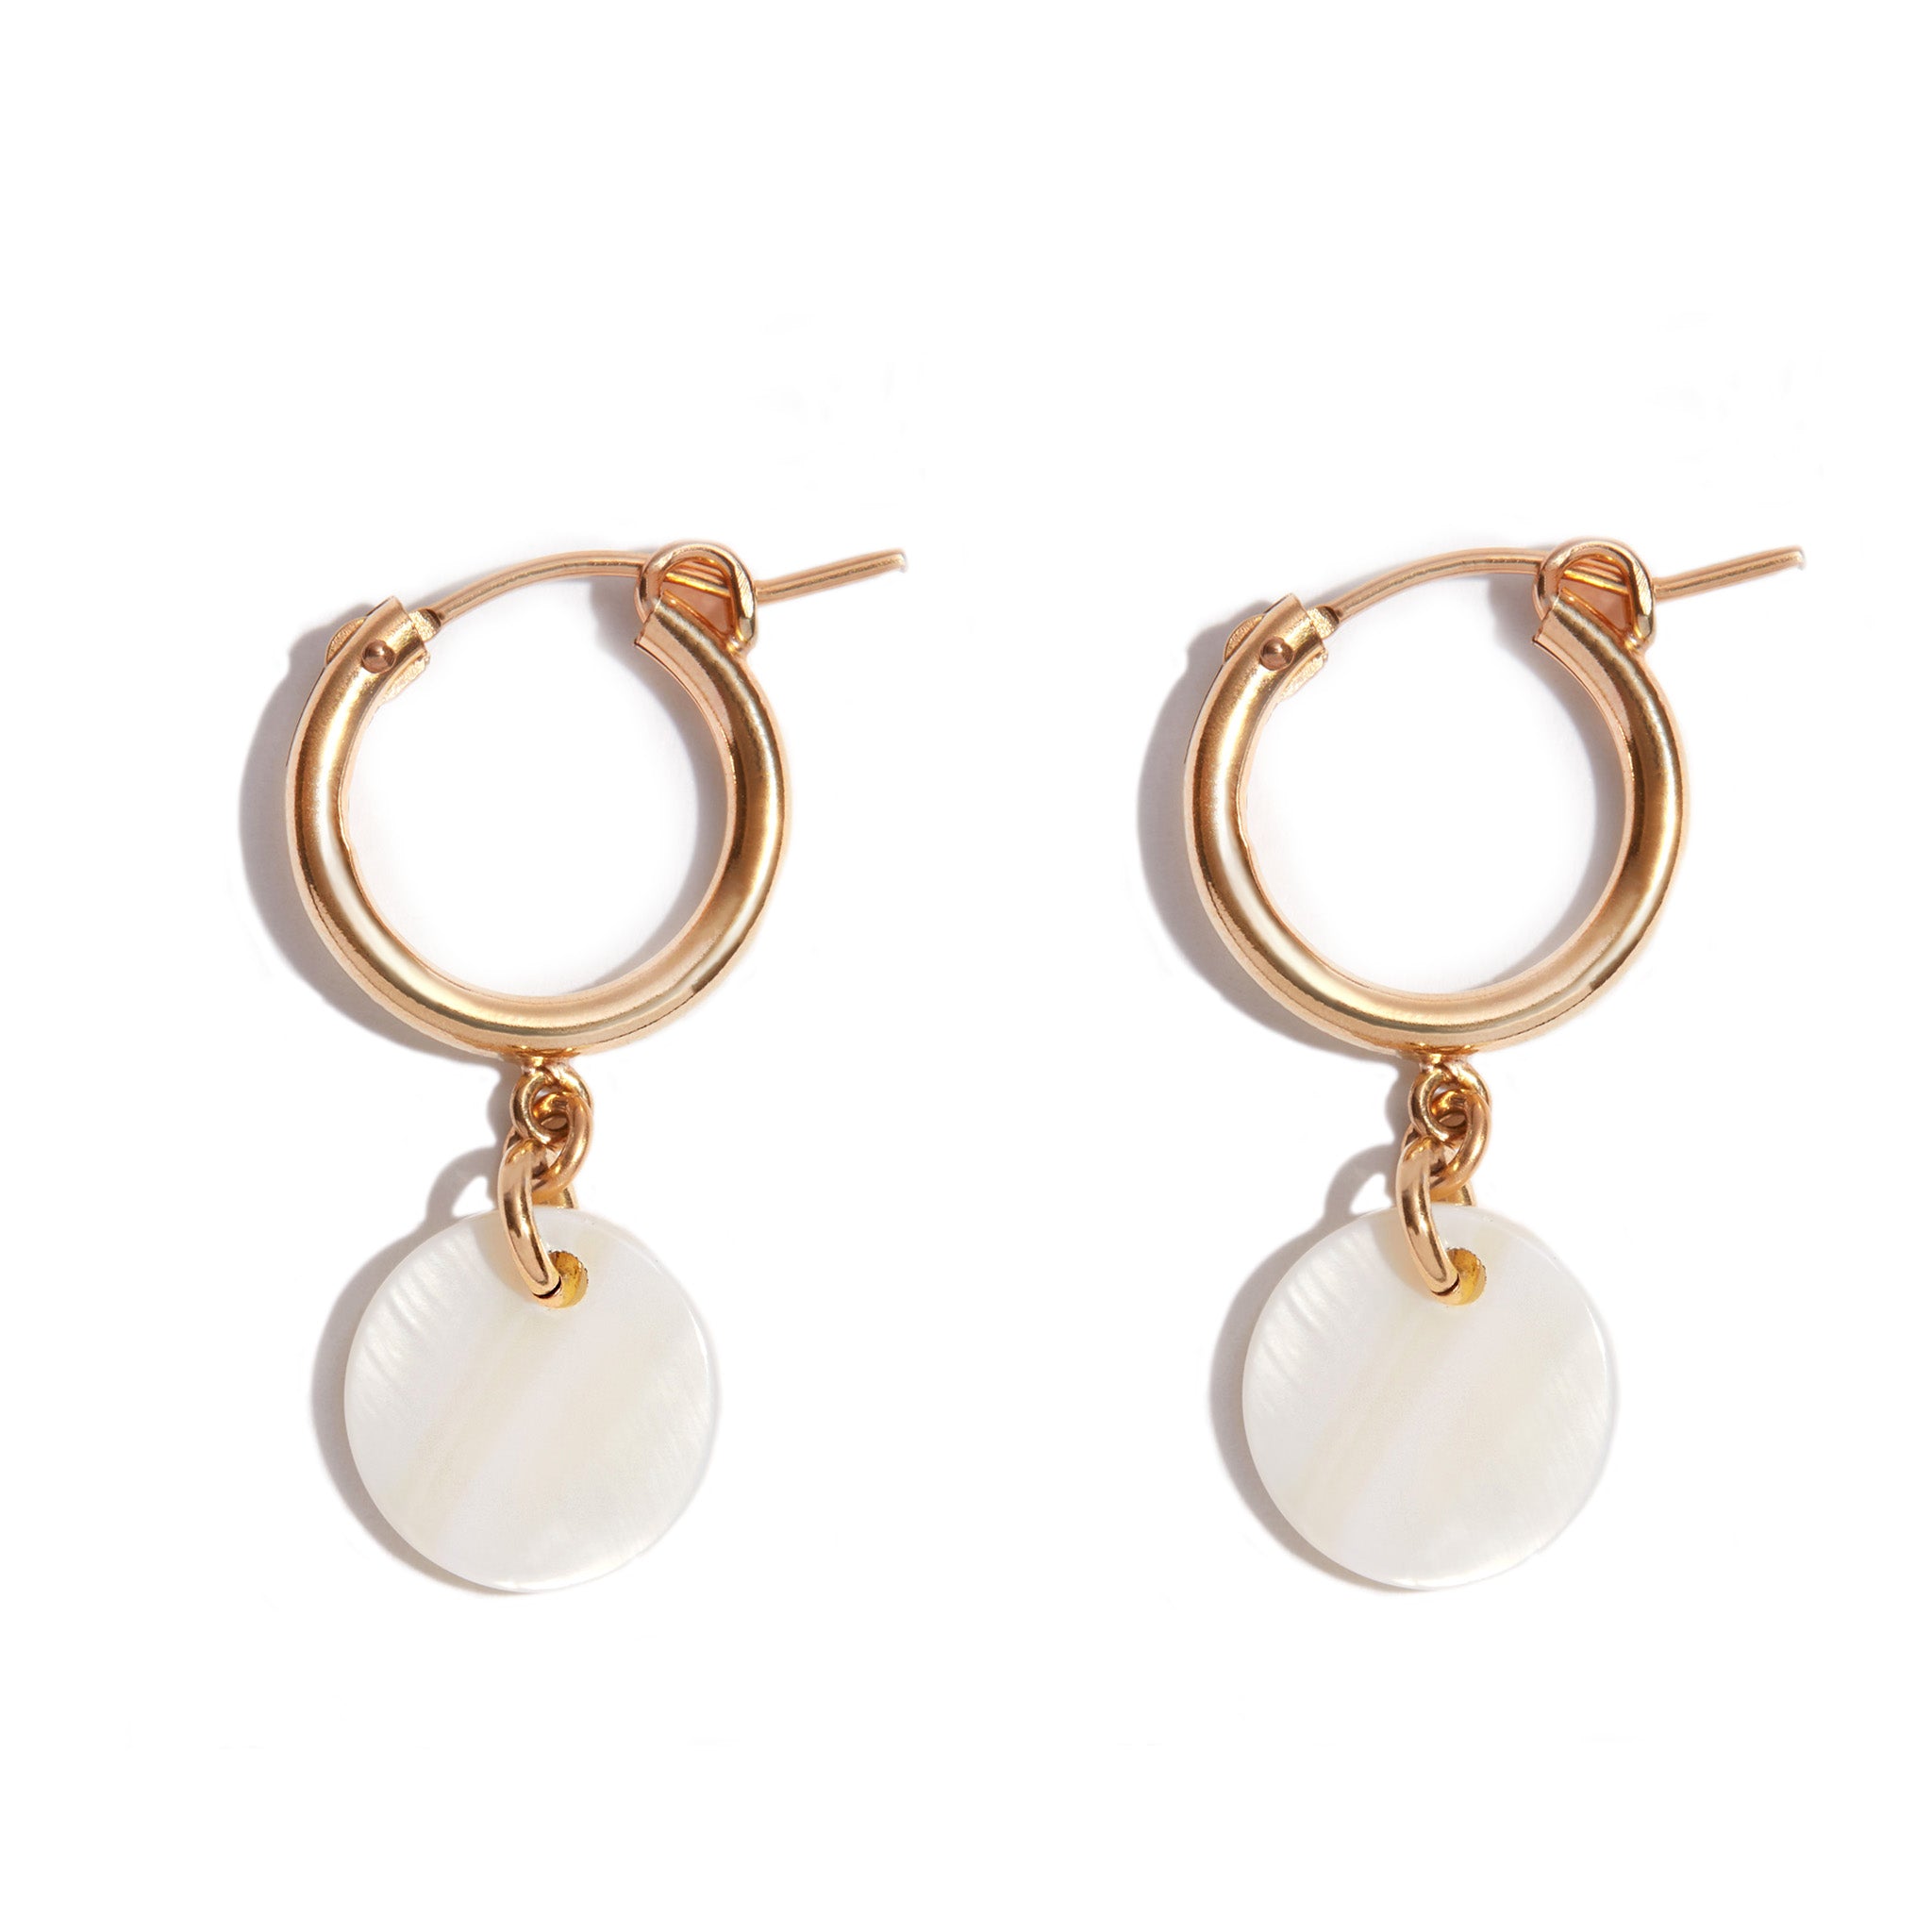 Simplistic Gold Filled Mother Pearl Hoop Drop earrings, perfect for layering or wearing on their own. Hoop Drops. Minimalistic design. For inquiries, contact us directly at hello@seoidin.com."